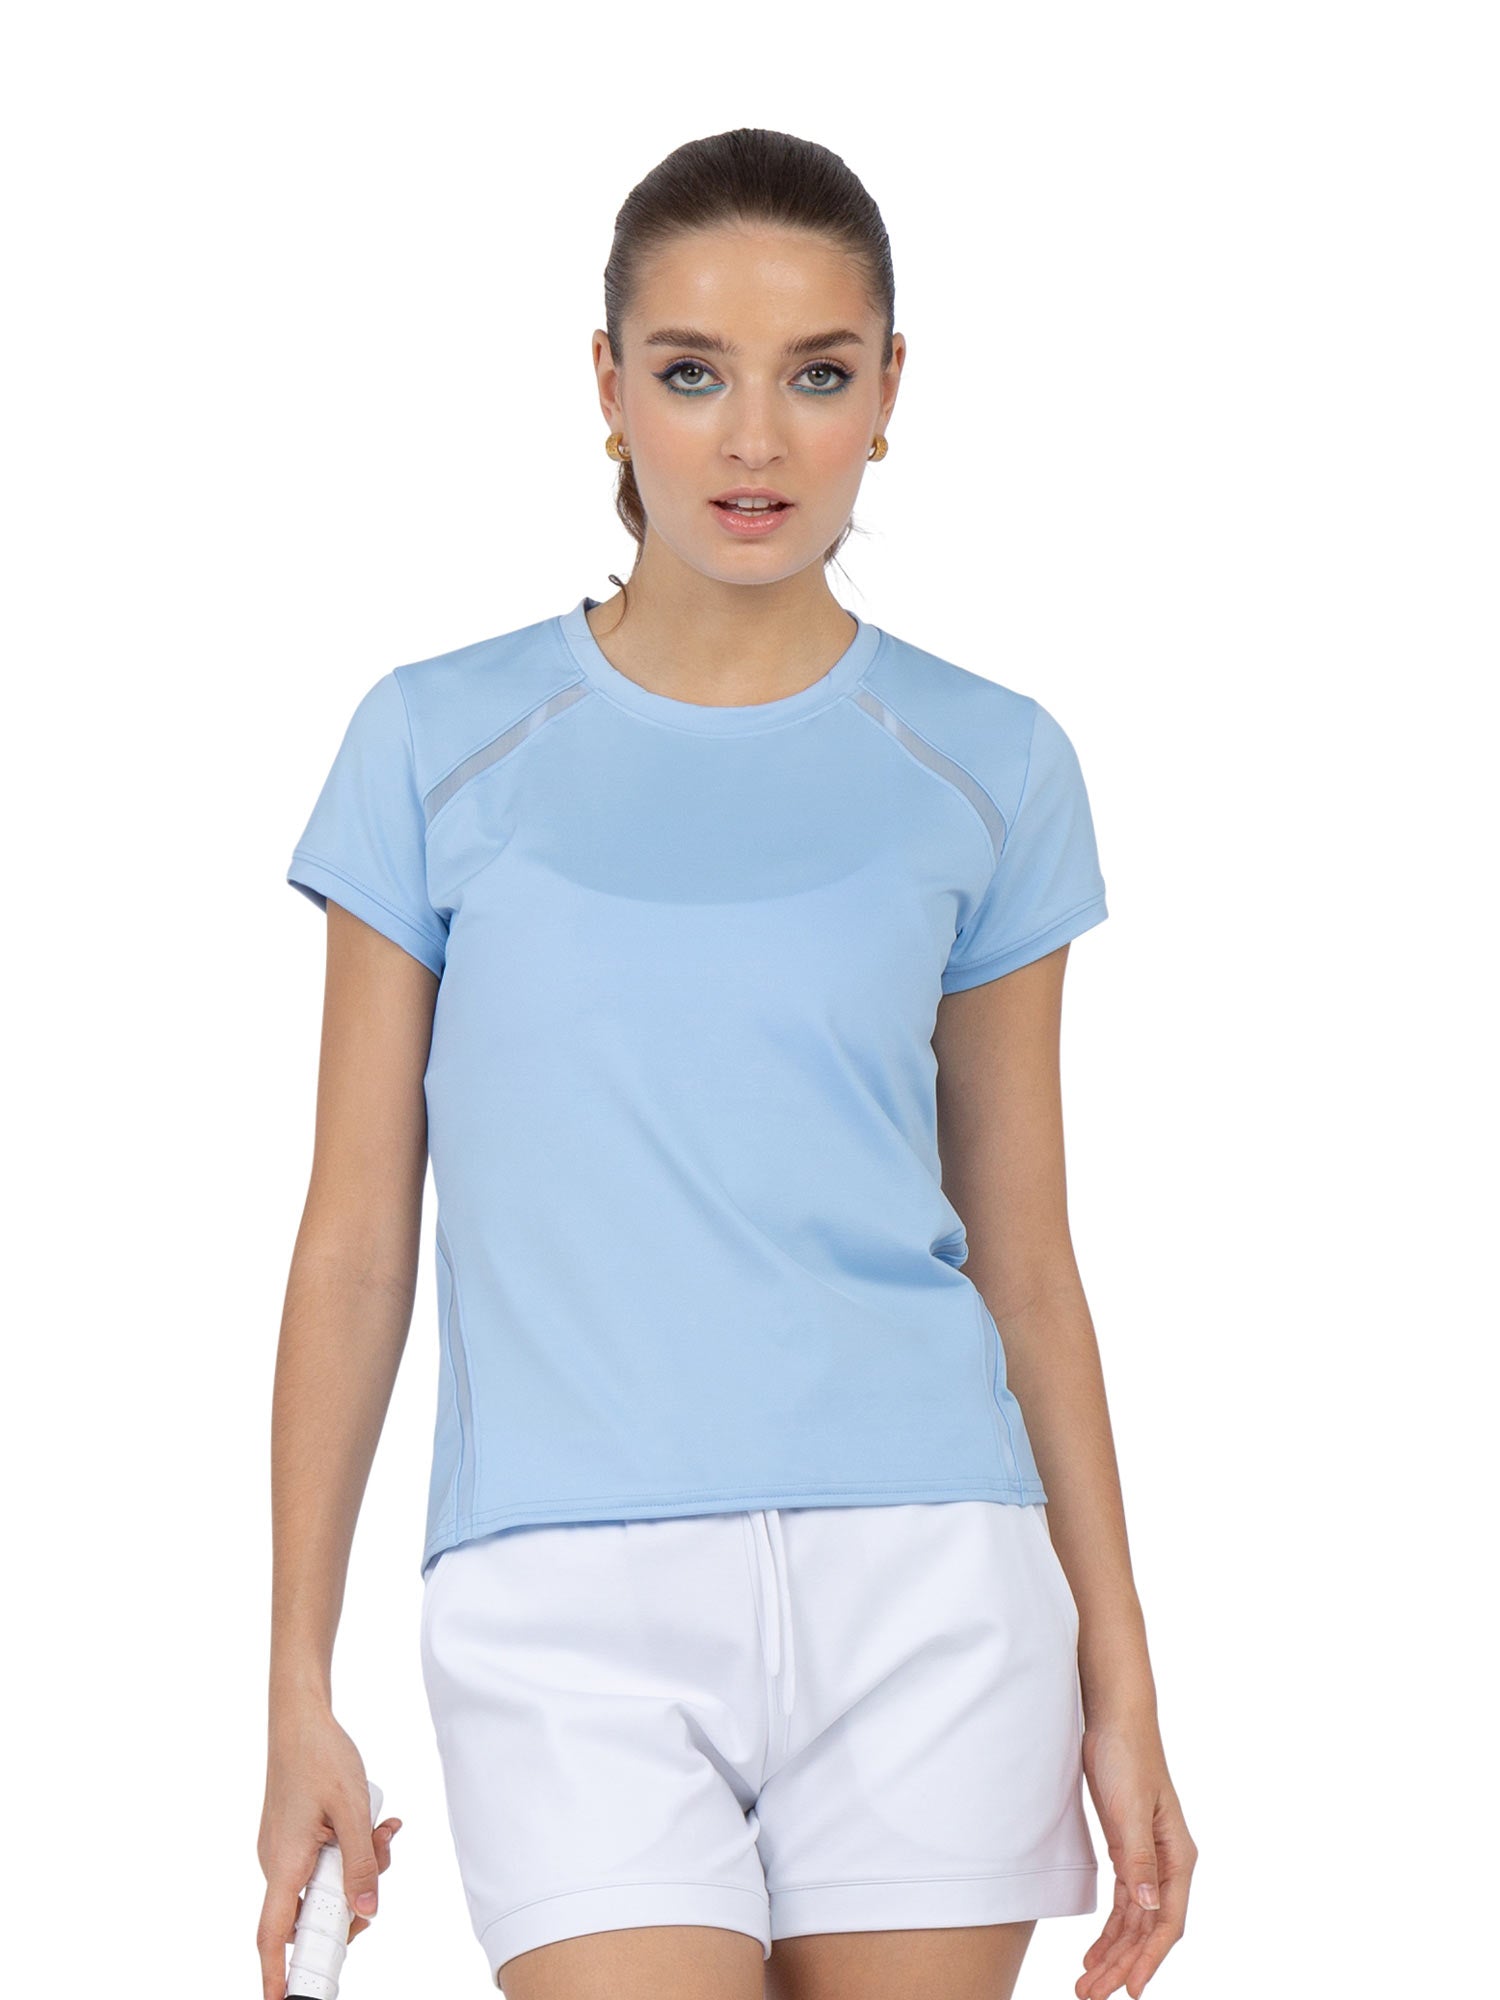 Front view of model wearing the classic short sleeve crew neck in bluebell by inPhorm NYC with her hands at her side